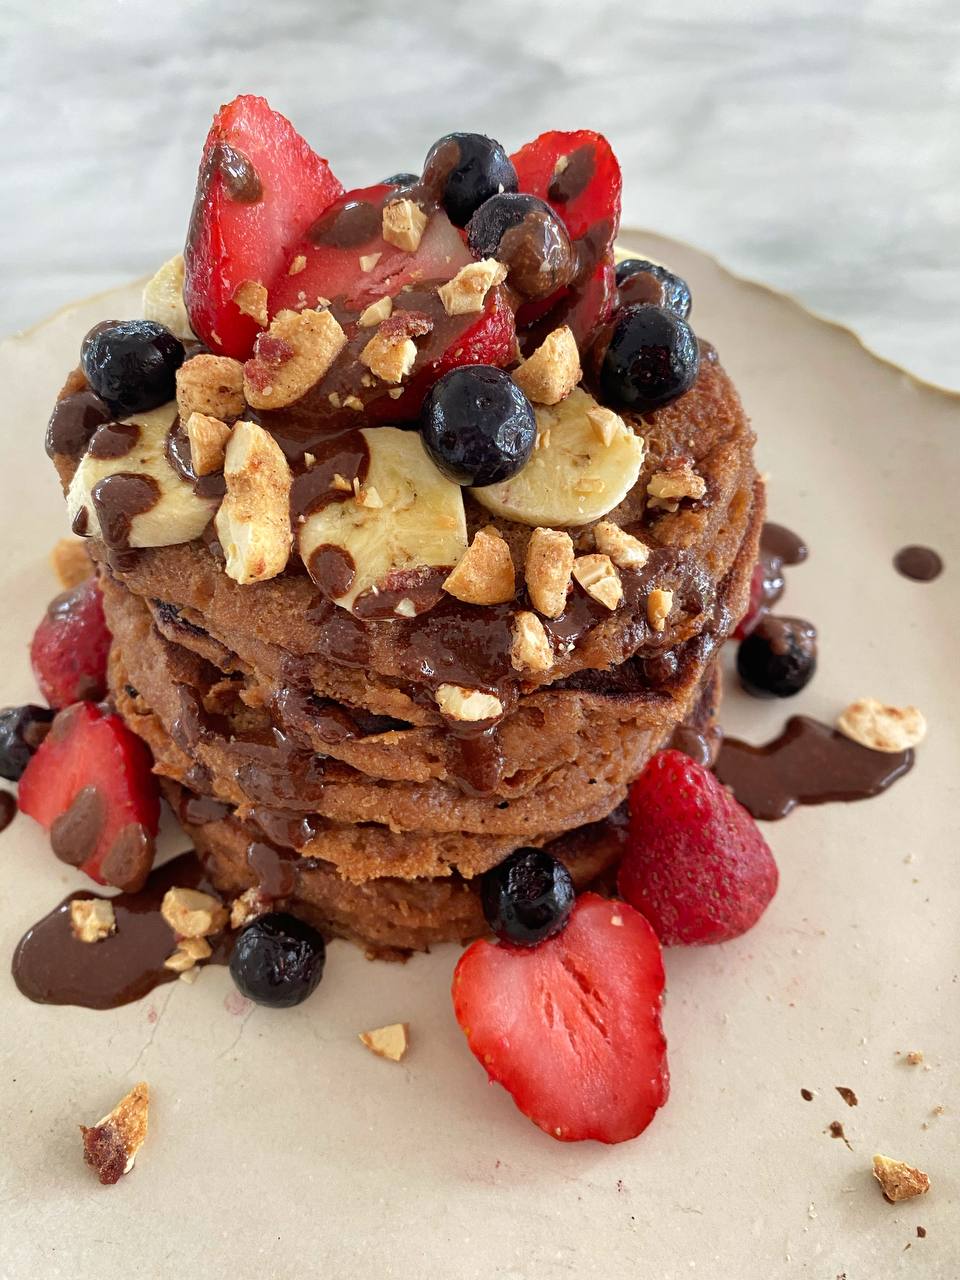 Gluten-free pancakes with almond and coconut flour with chocolate tahini sauce by Samantha Morales